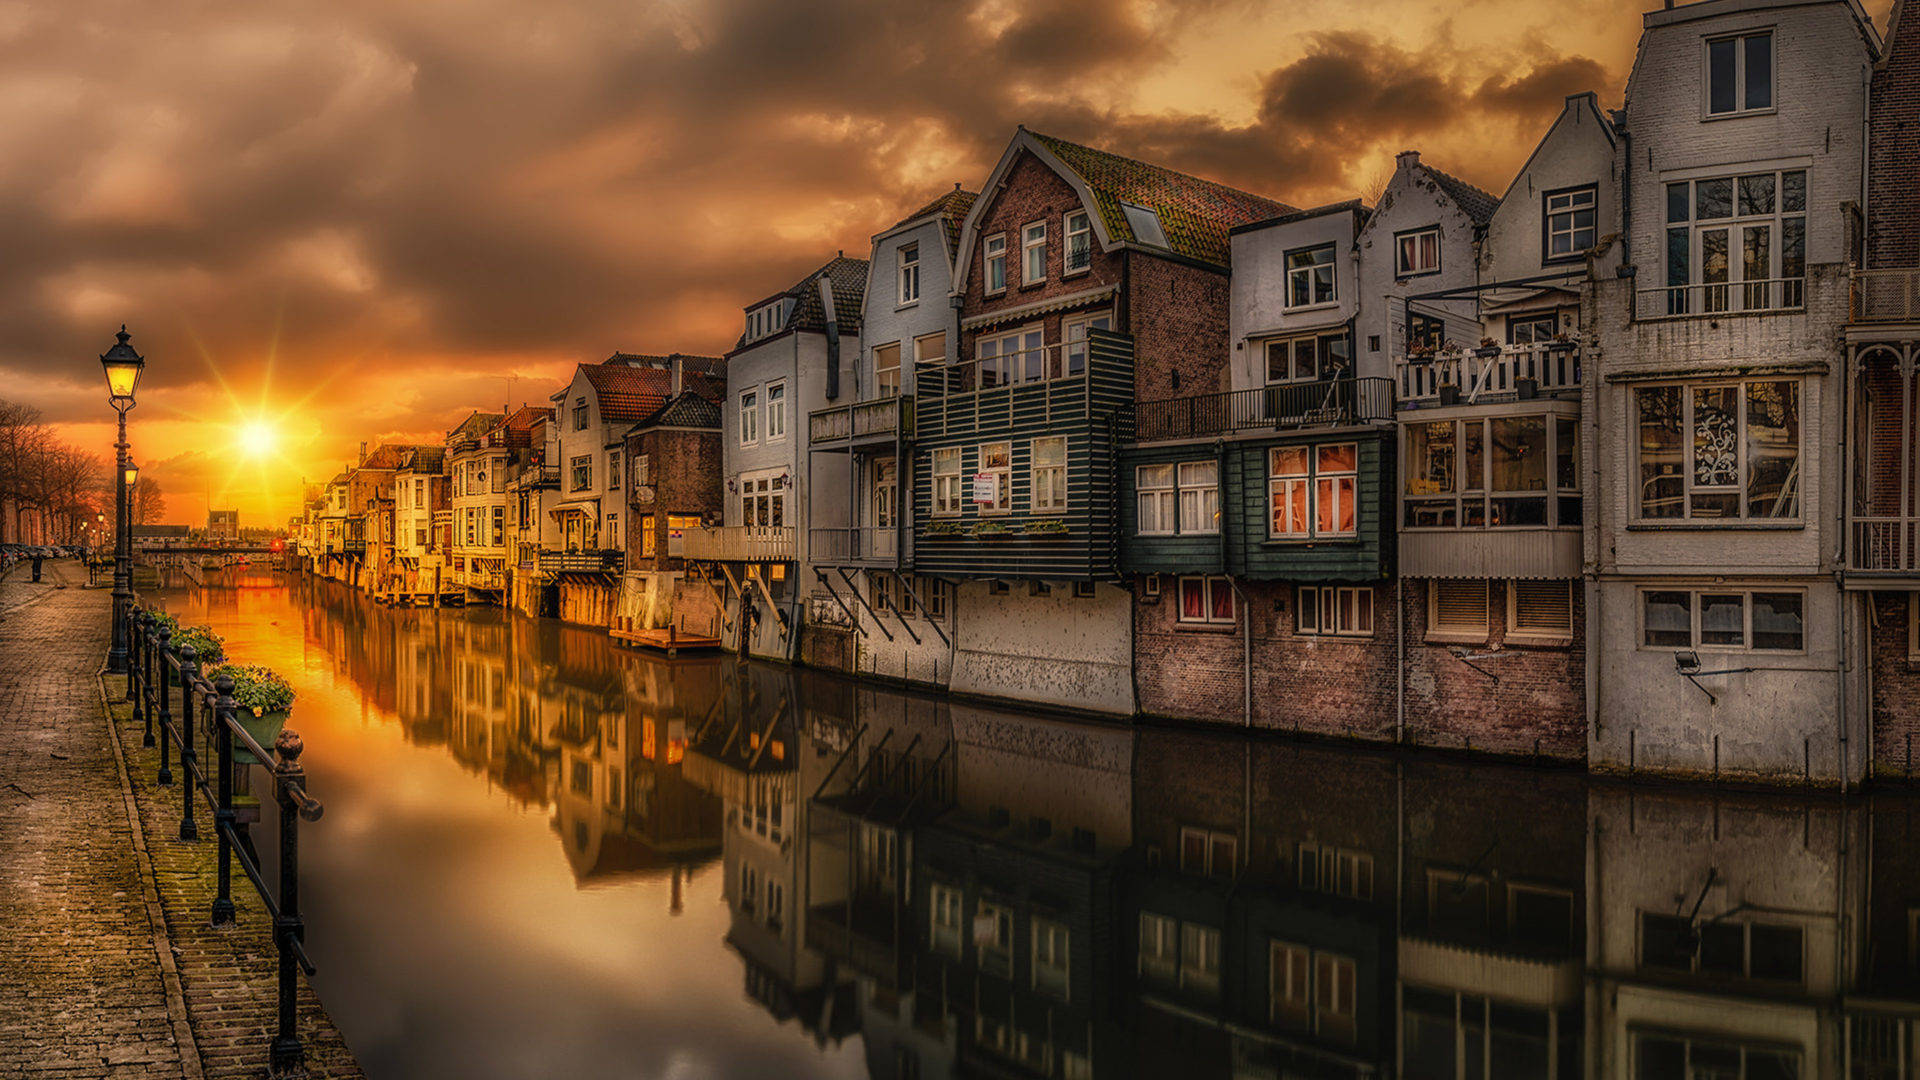 Beautiful Scenery Houses By The River